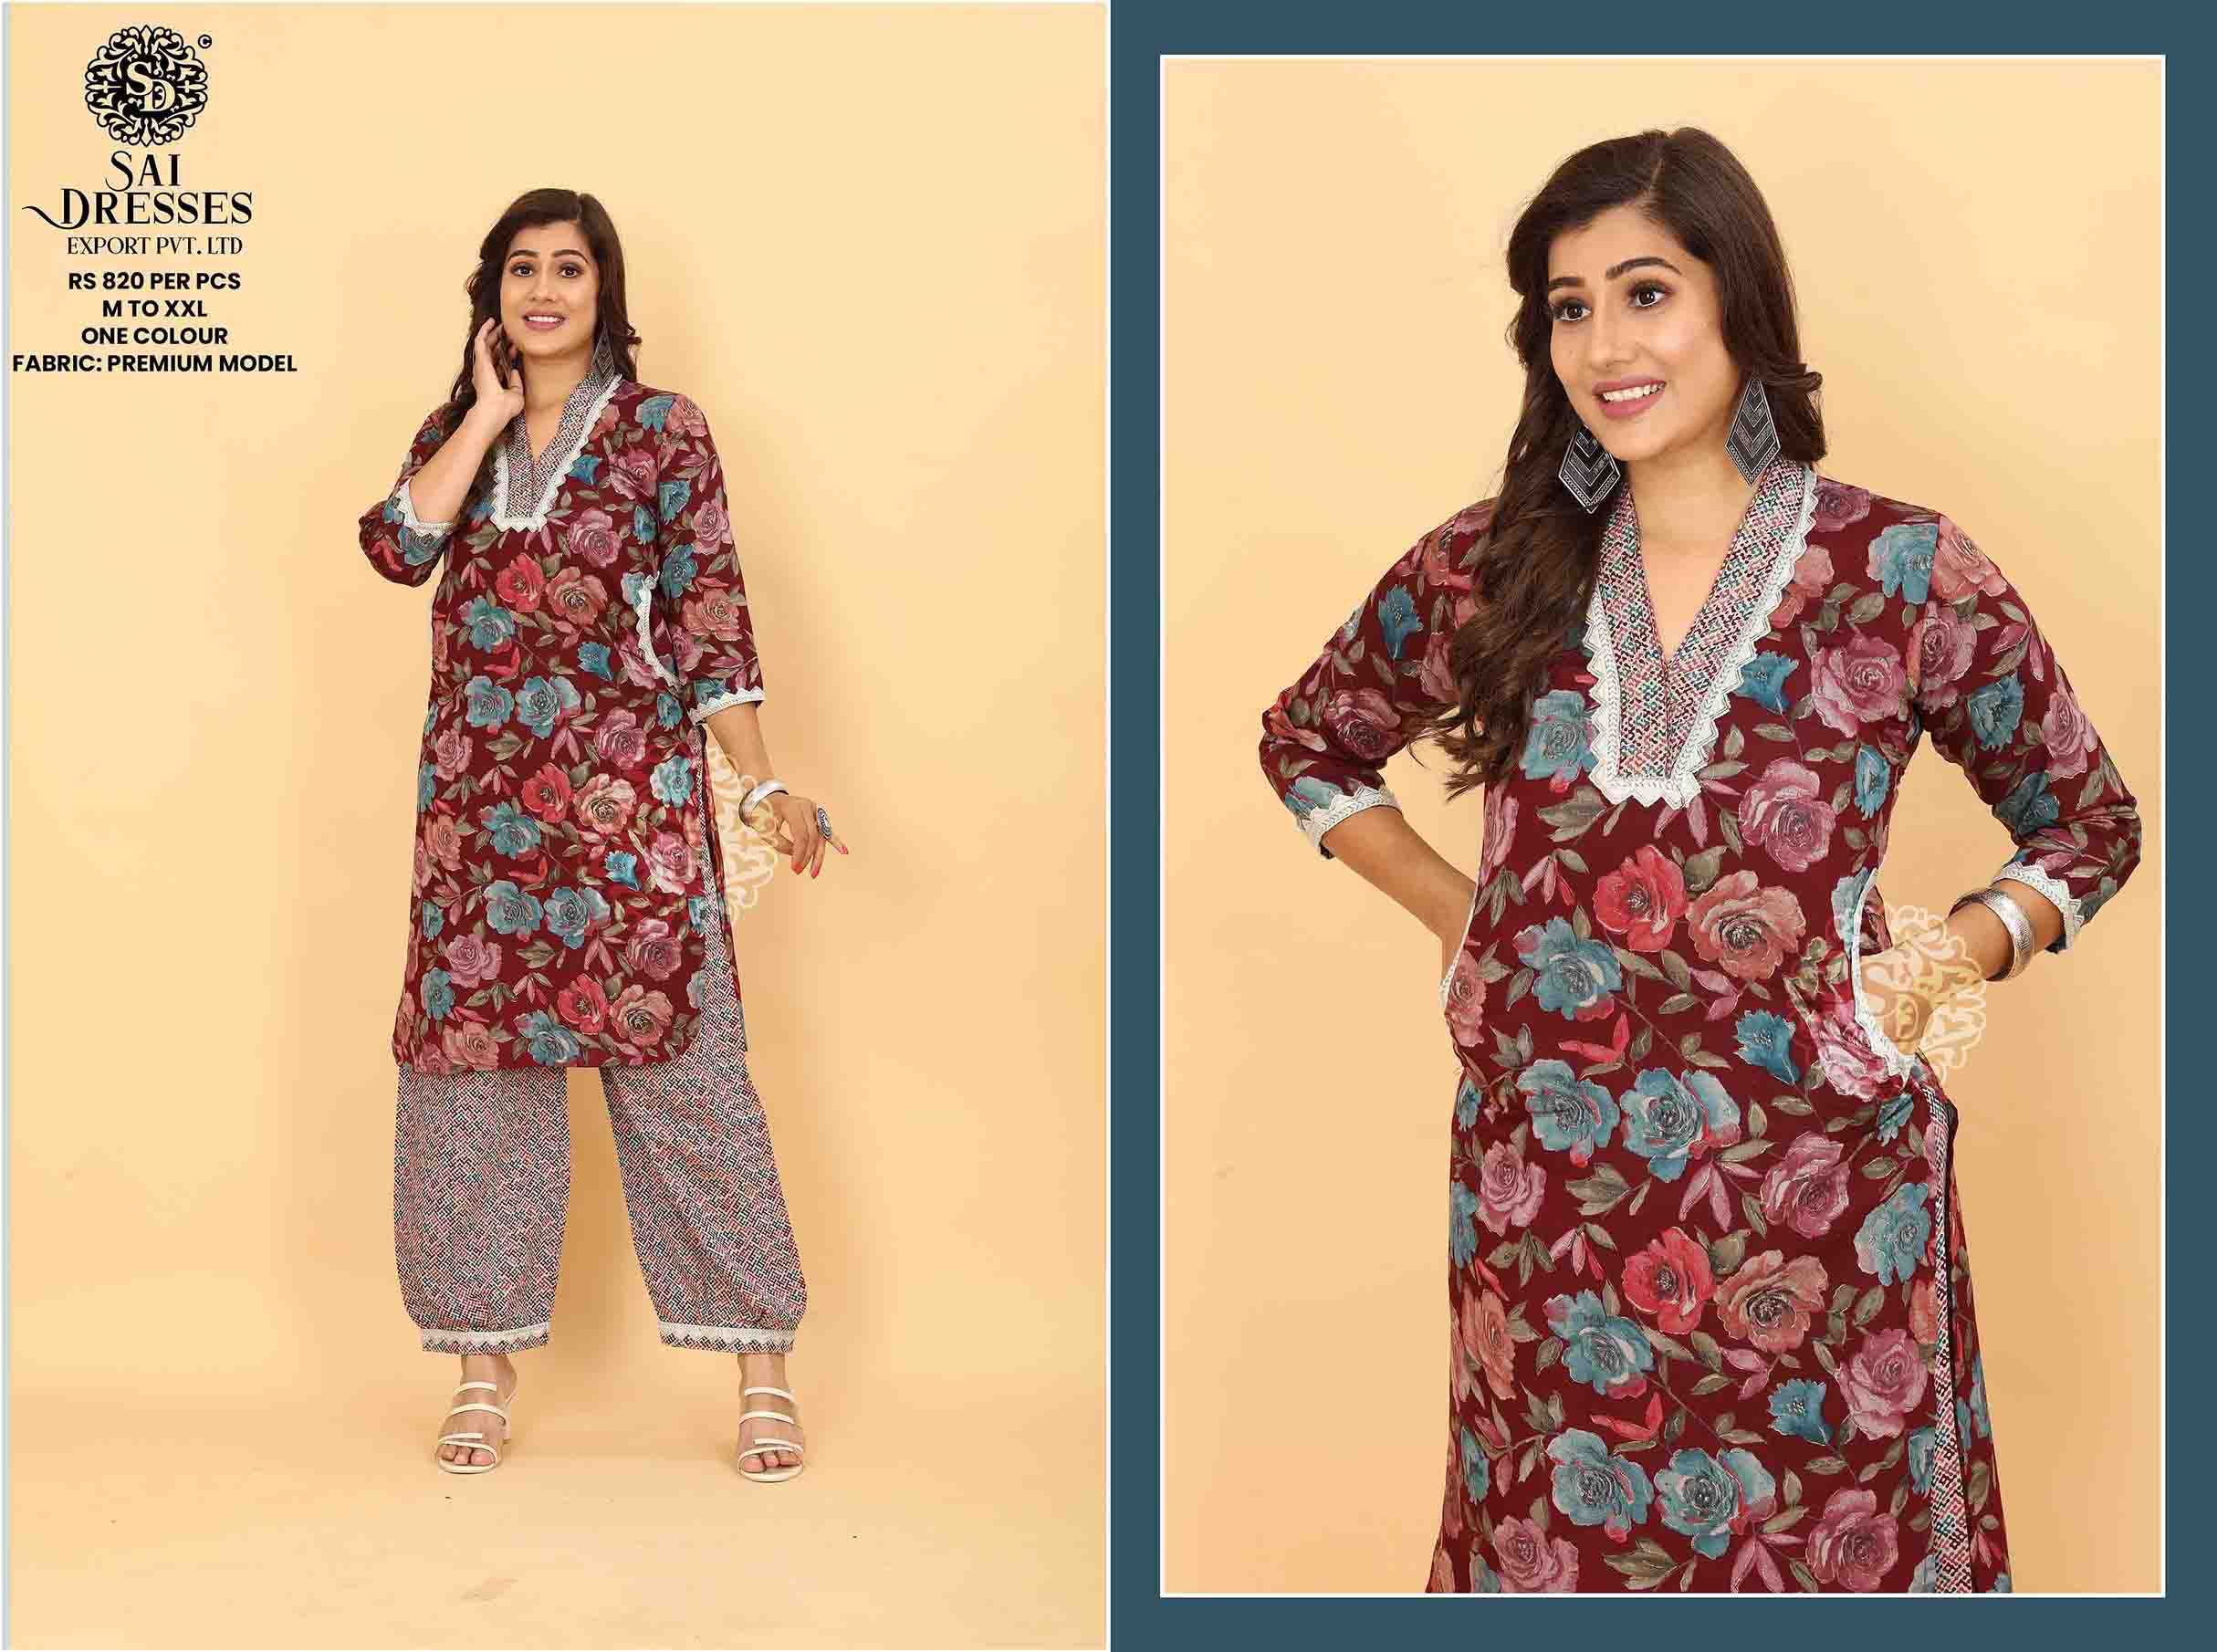 SAI DRESSES PRESENT D.NO SD 5017 READY TO EXCLUSIVE TRENDY WEAR PATHANI KURTA WITH AFGHANI PANT STYLE COMBO COLLECTION IN WHOLESALE RATE IN SURAT